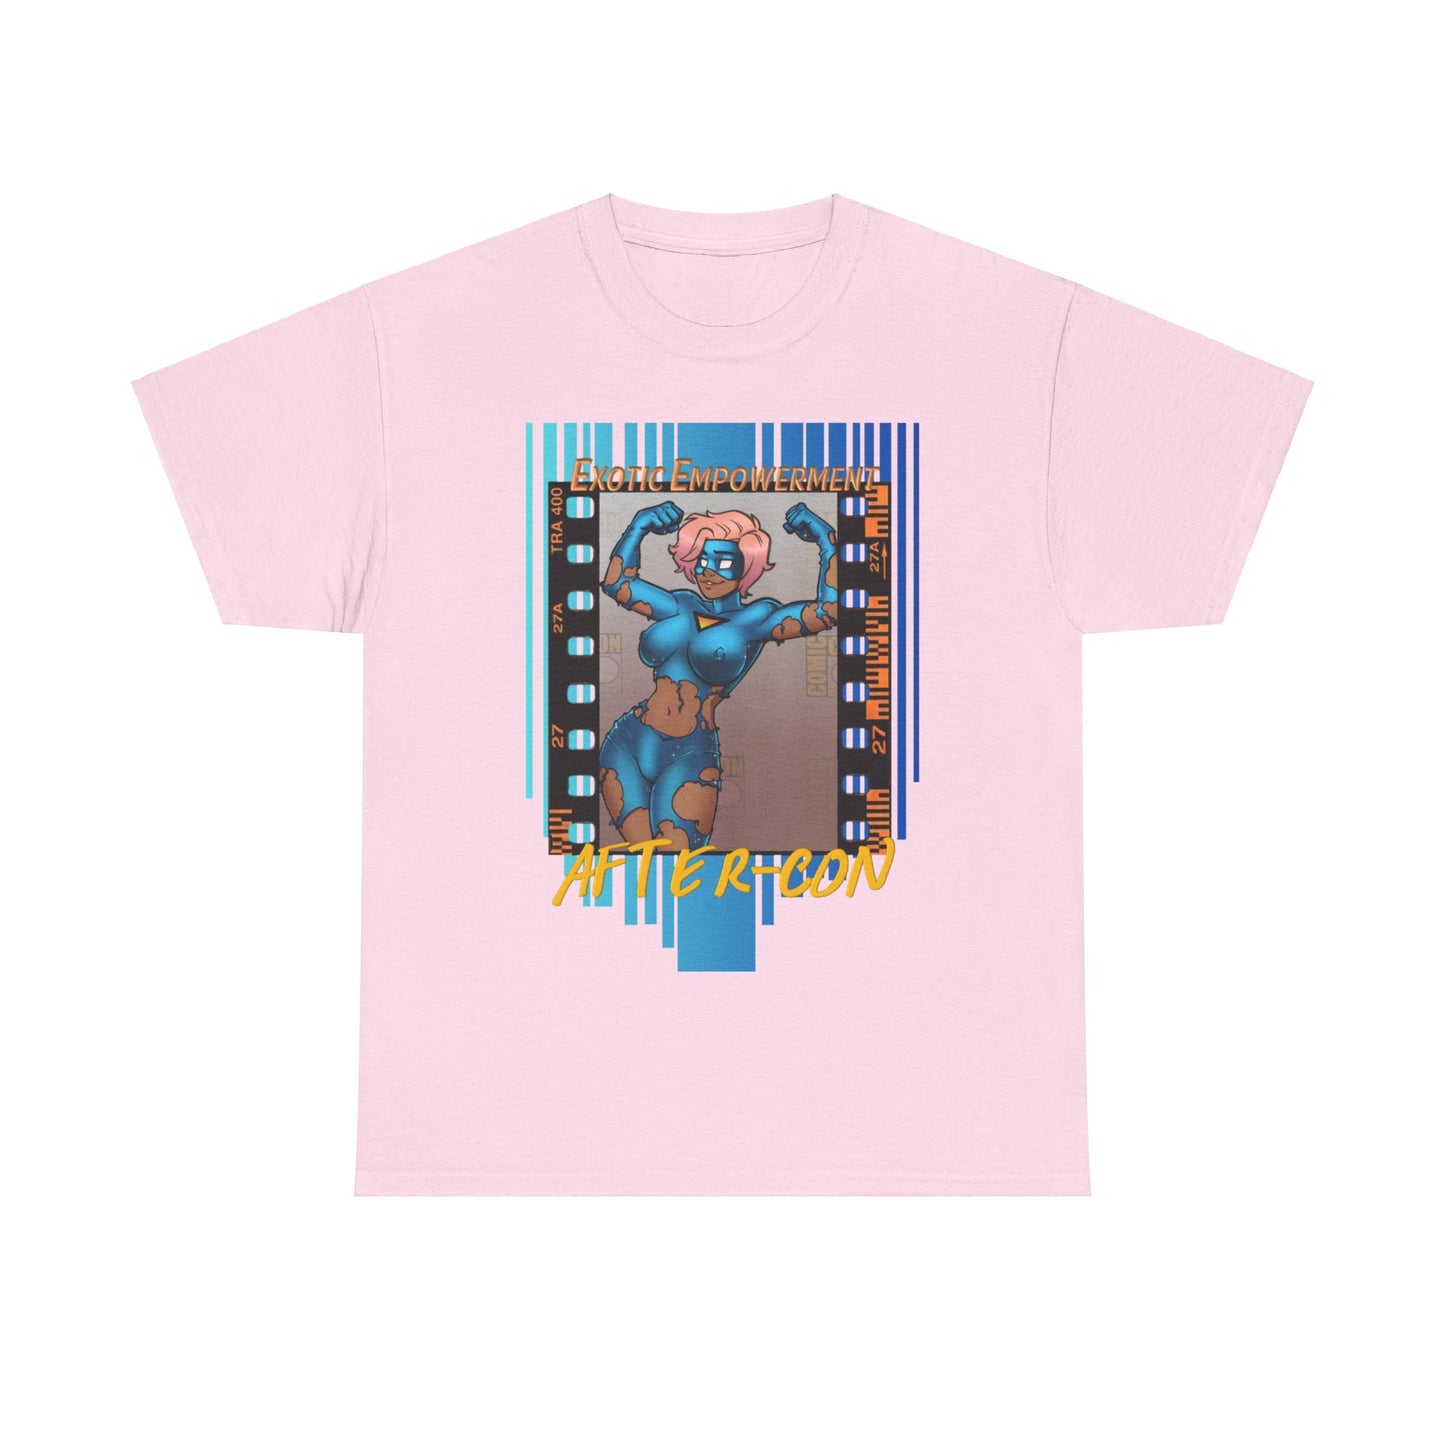 After-Con "Exotic Empowerment" Unisex Heavy Cotton Tee